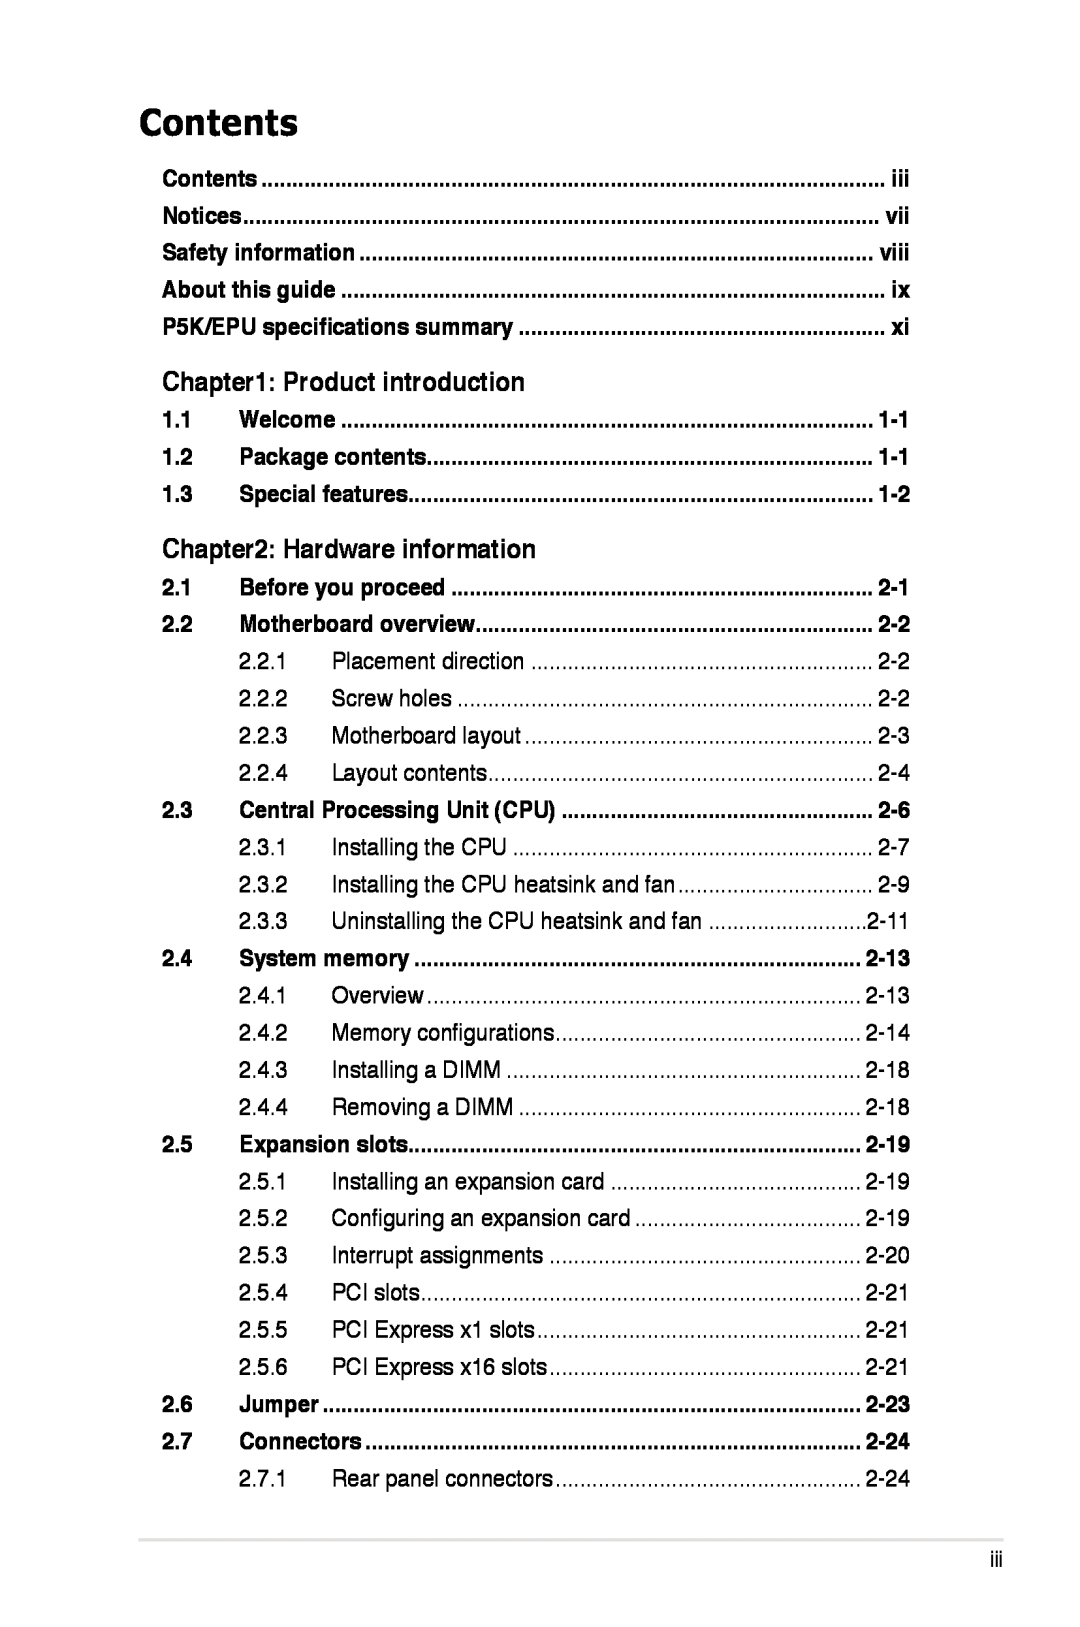 Asus P5K/EPU manual Contents, Product introduction, Hardware information, viii 